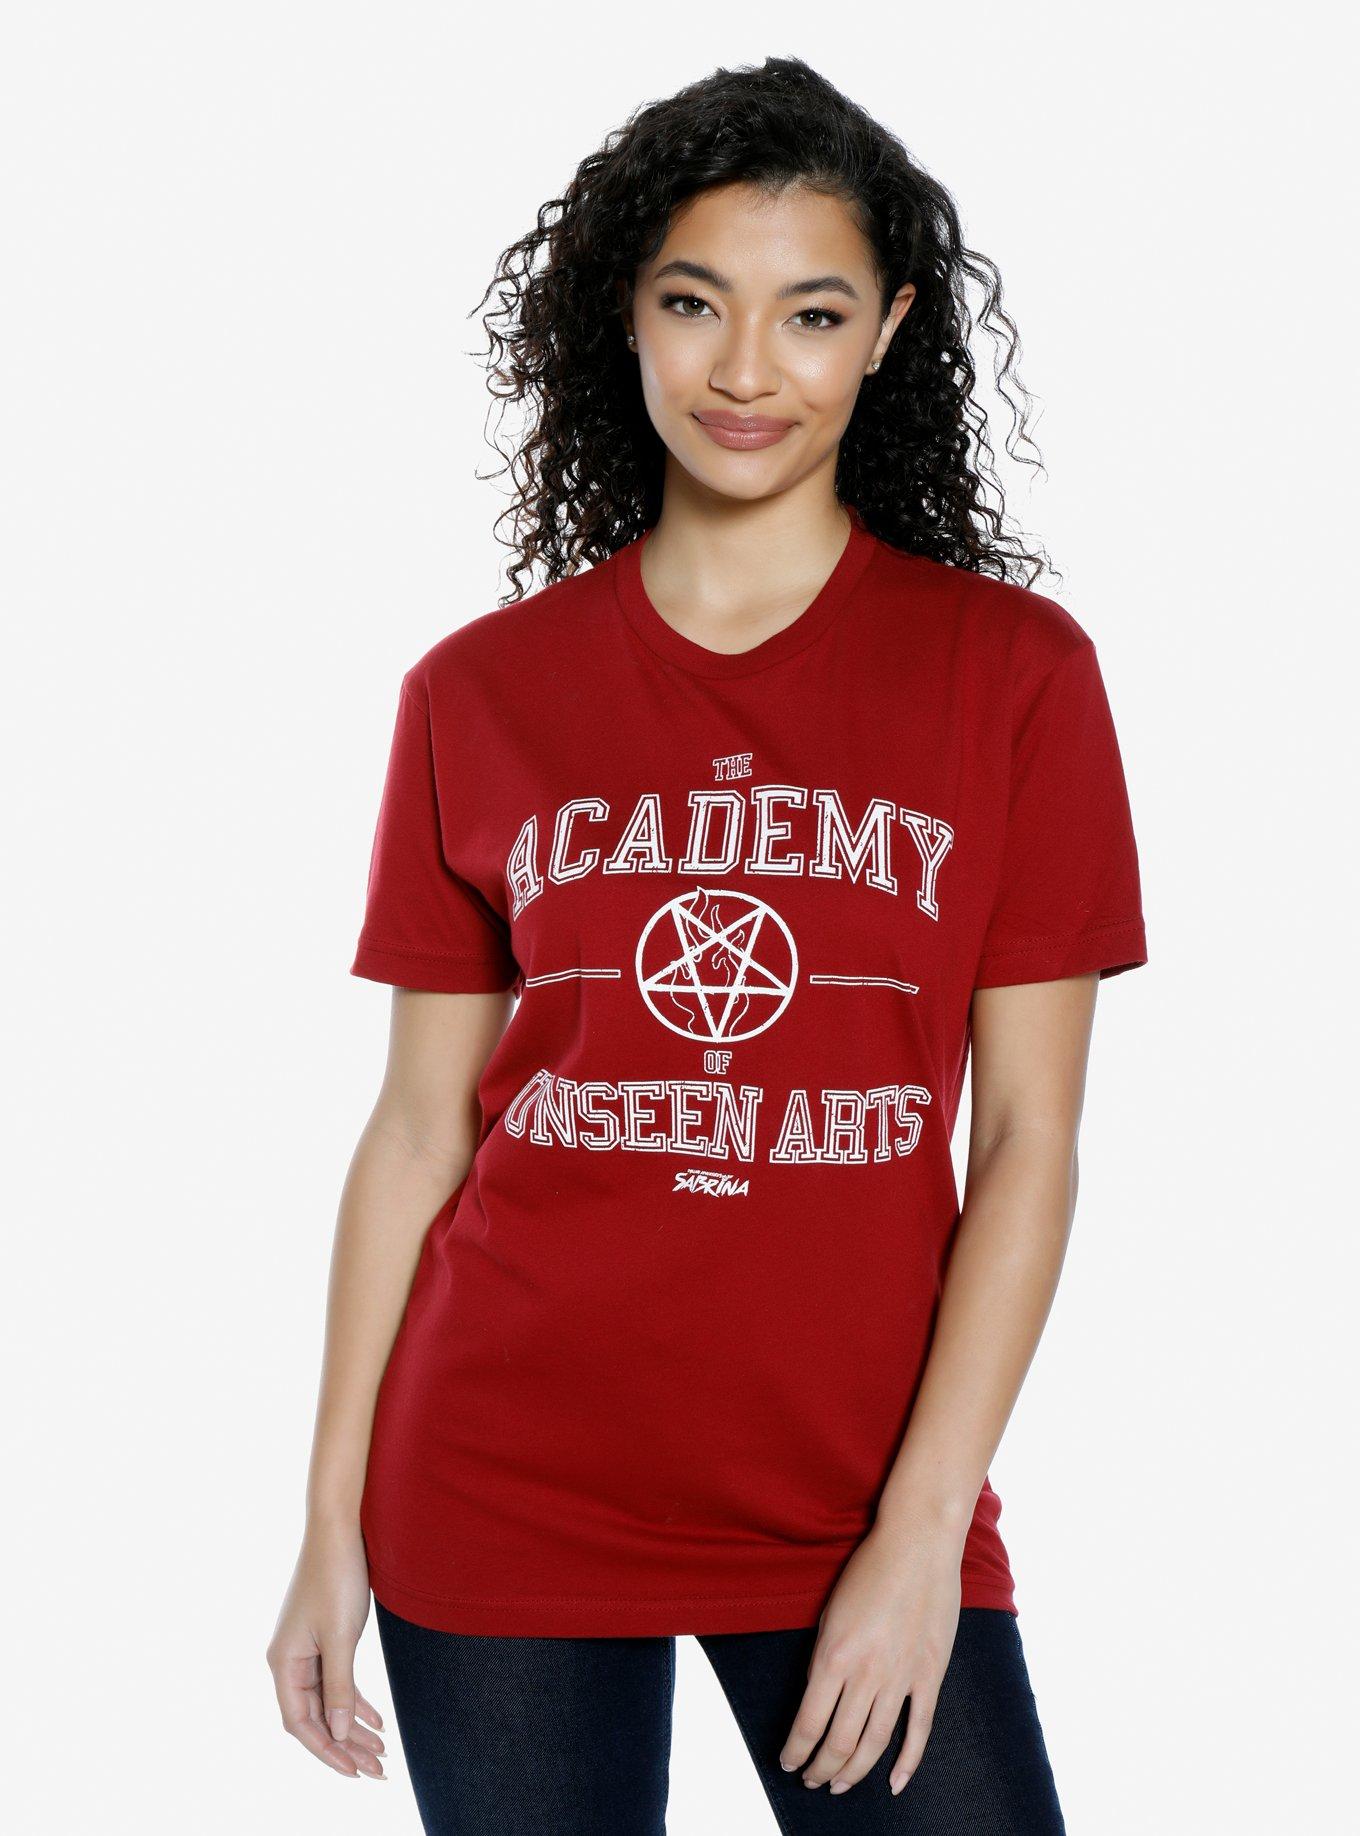 The Chilling Adventures of Sabrina Academy Unseen Arts Womens T-Shirt, RED, hi-res